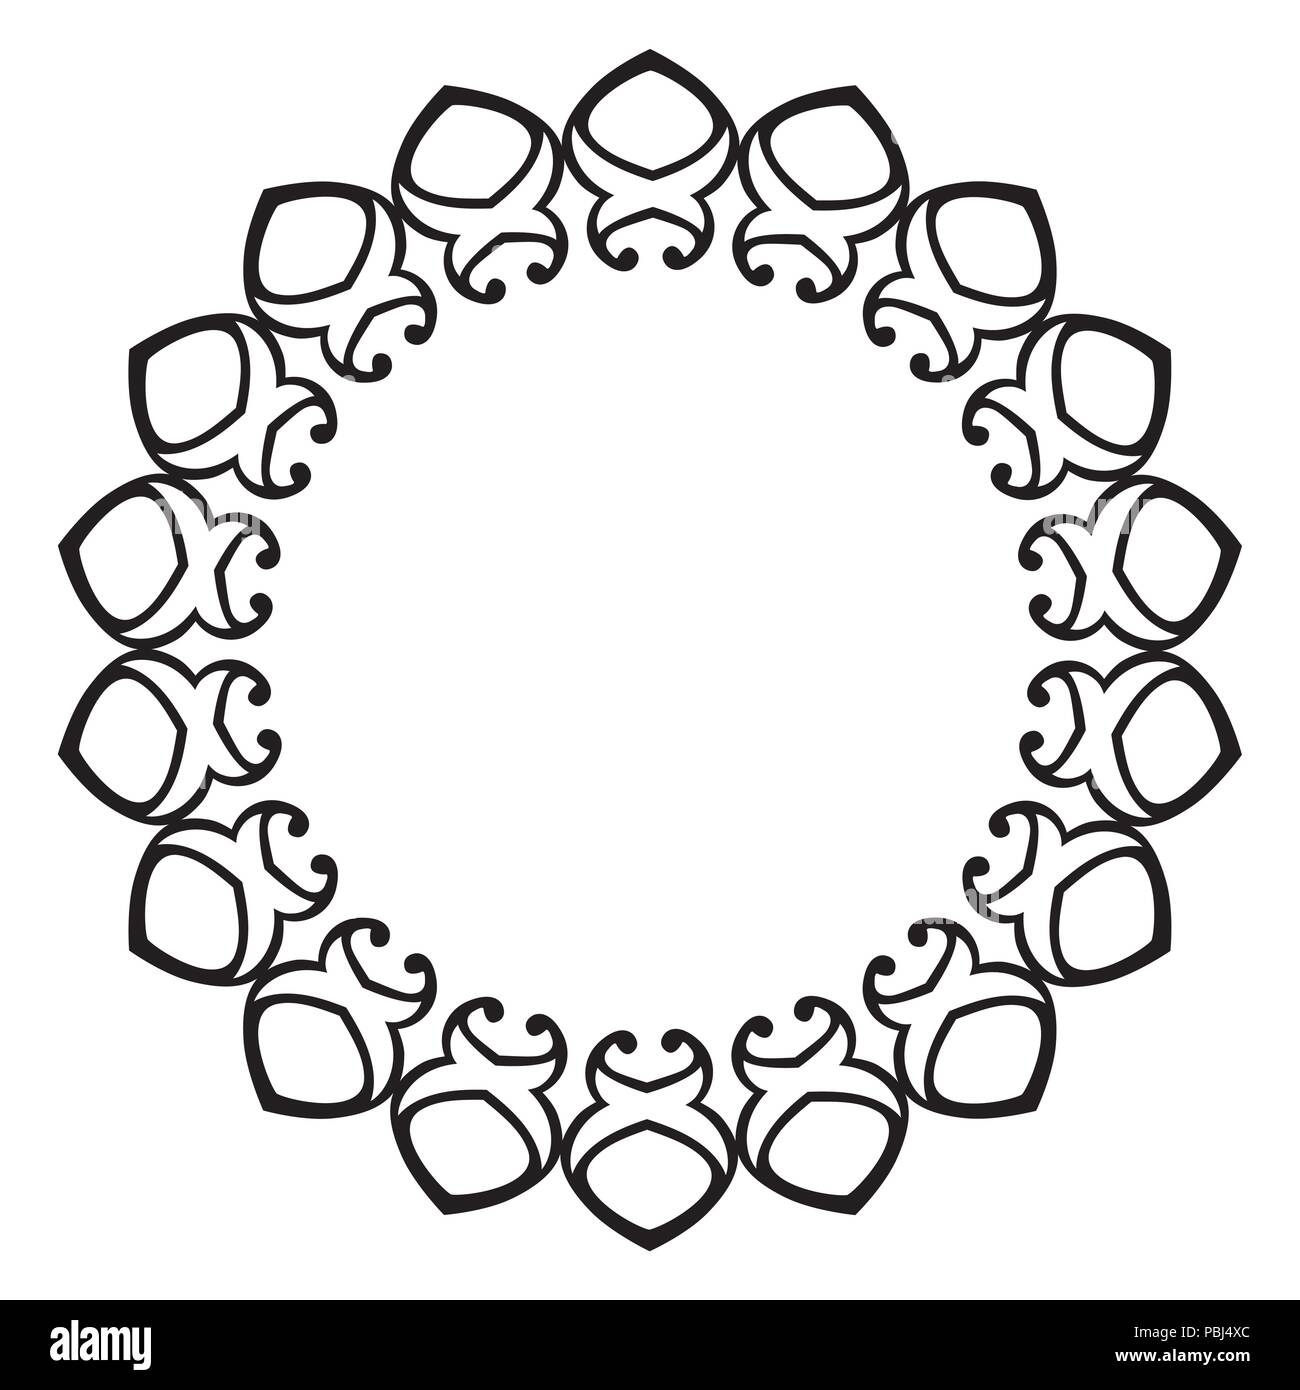 Artistic black and white circle frame, oriental style Stock Vector